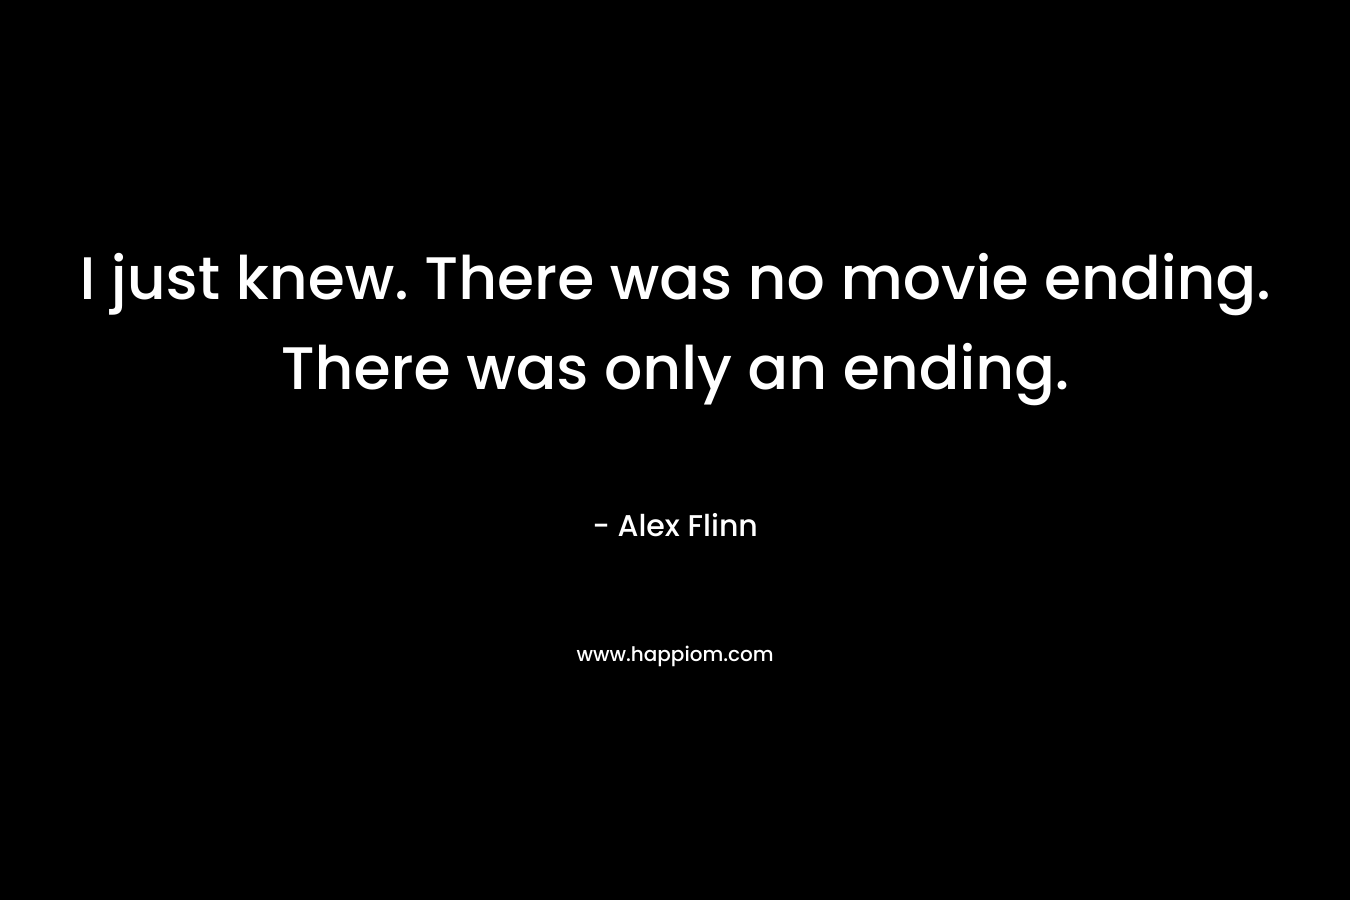 I just knew. There was no movie ending. There was only an ending. – Alex Flinn